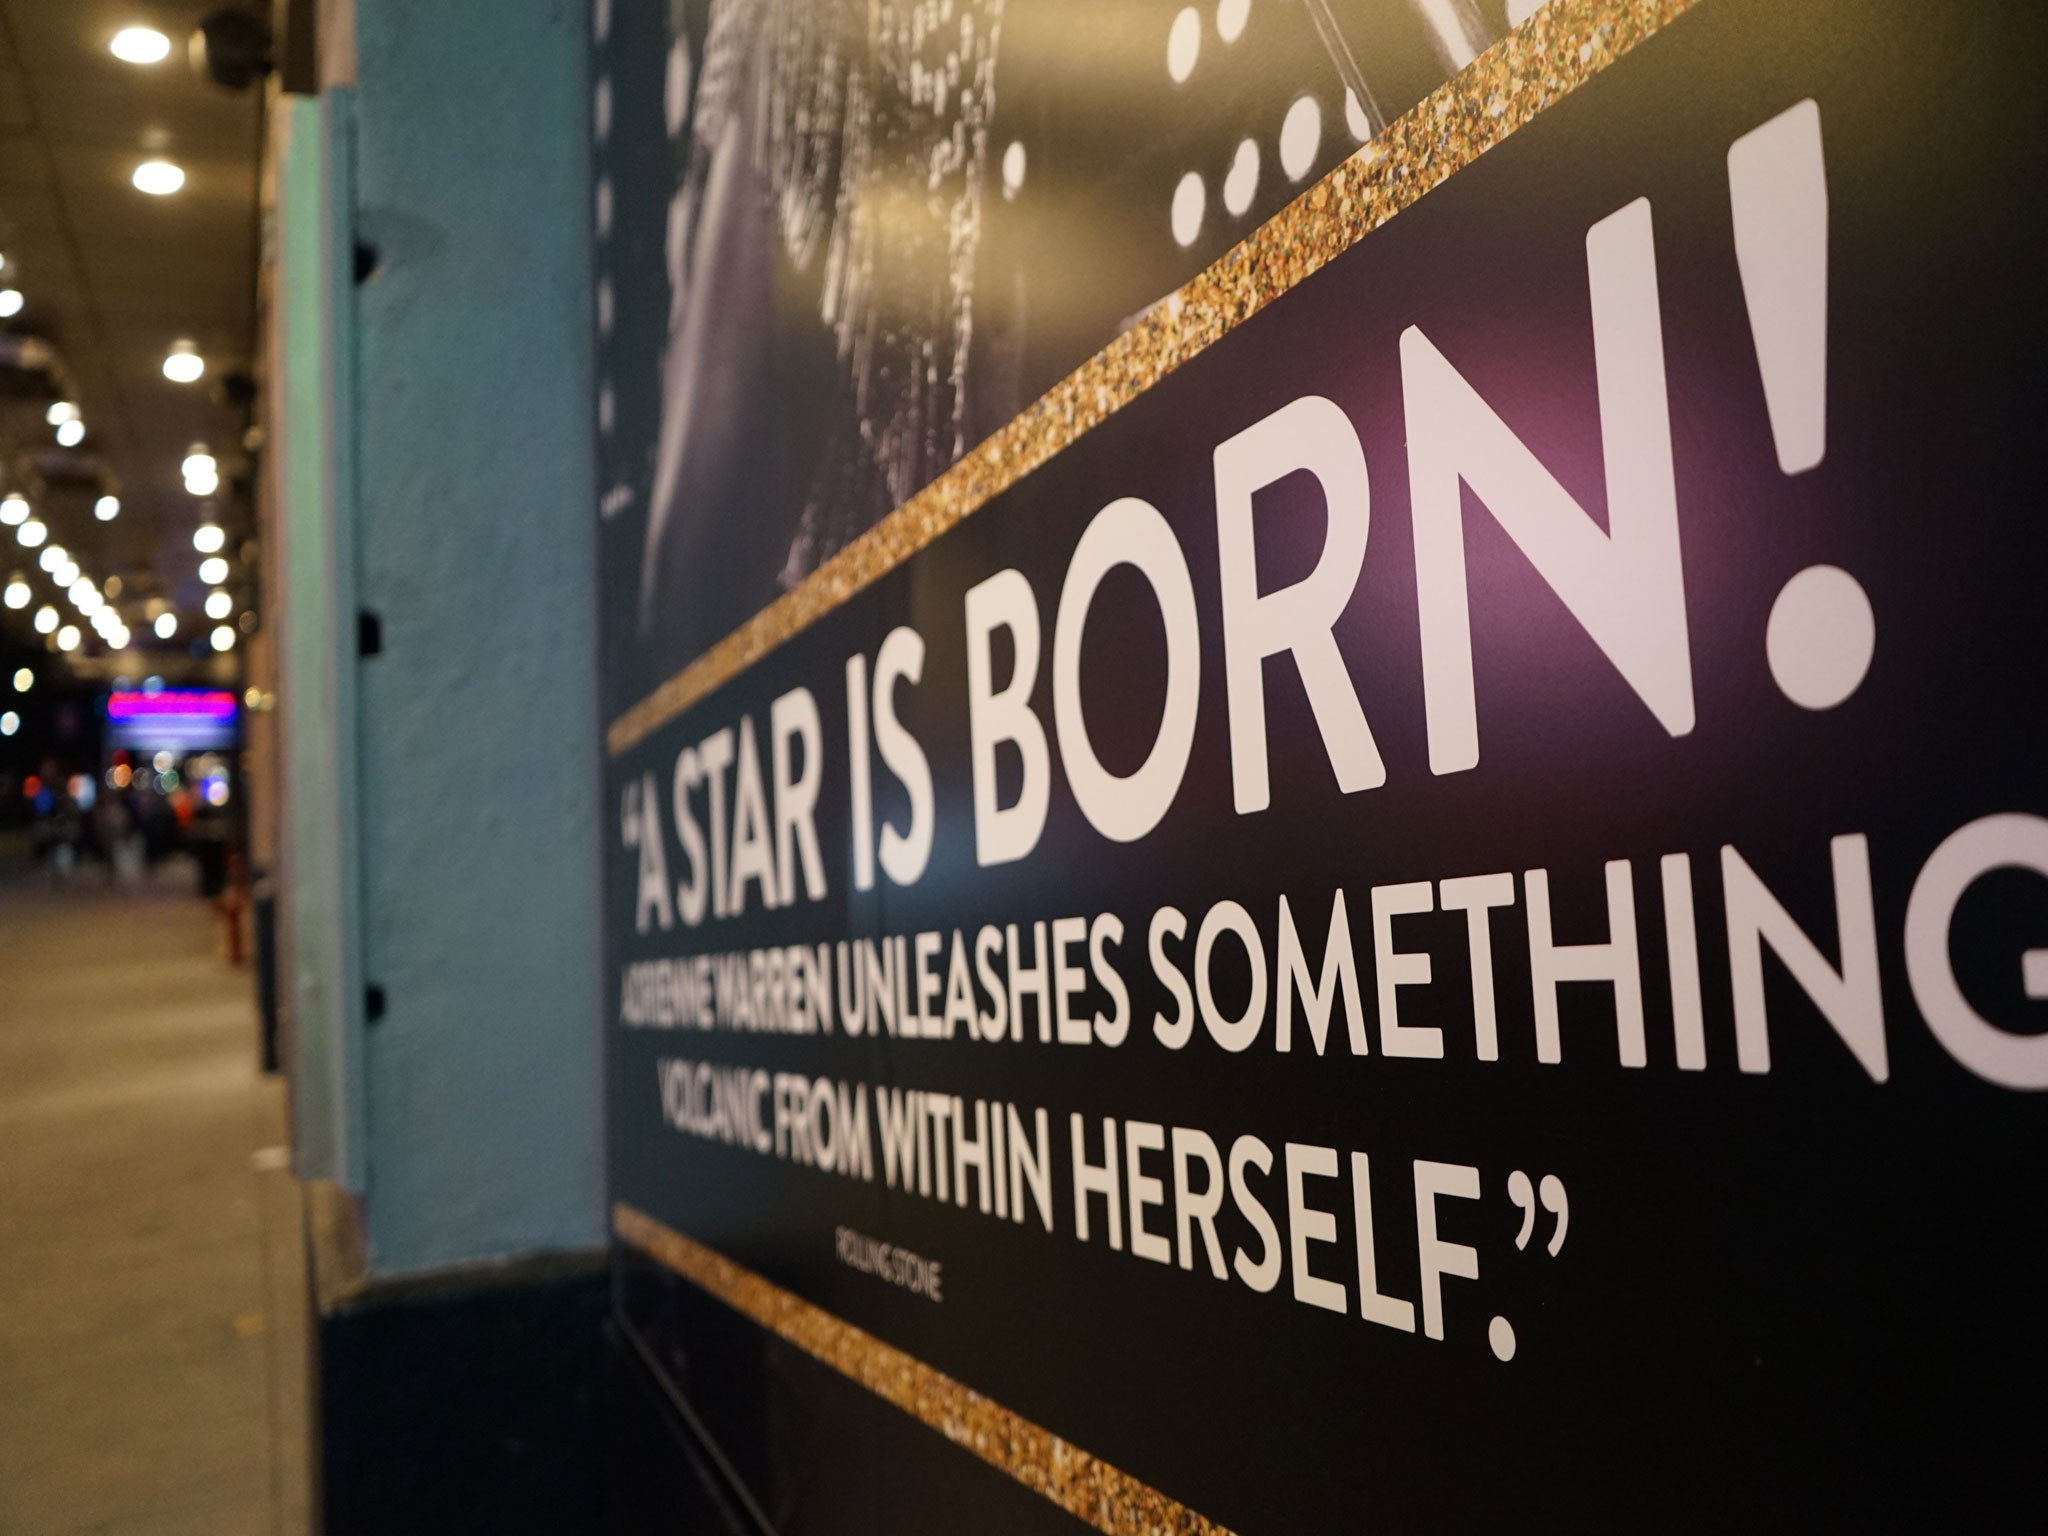 A Star is Born Show Marquee